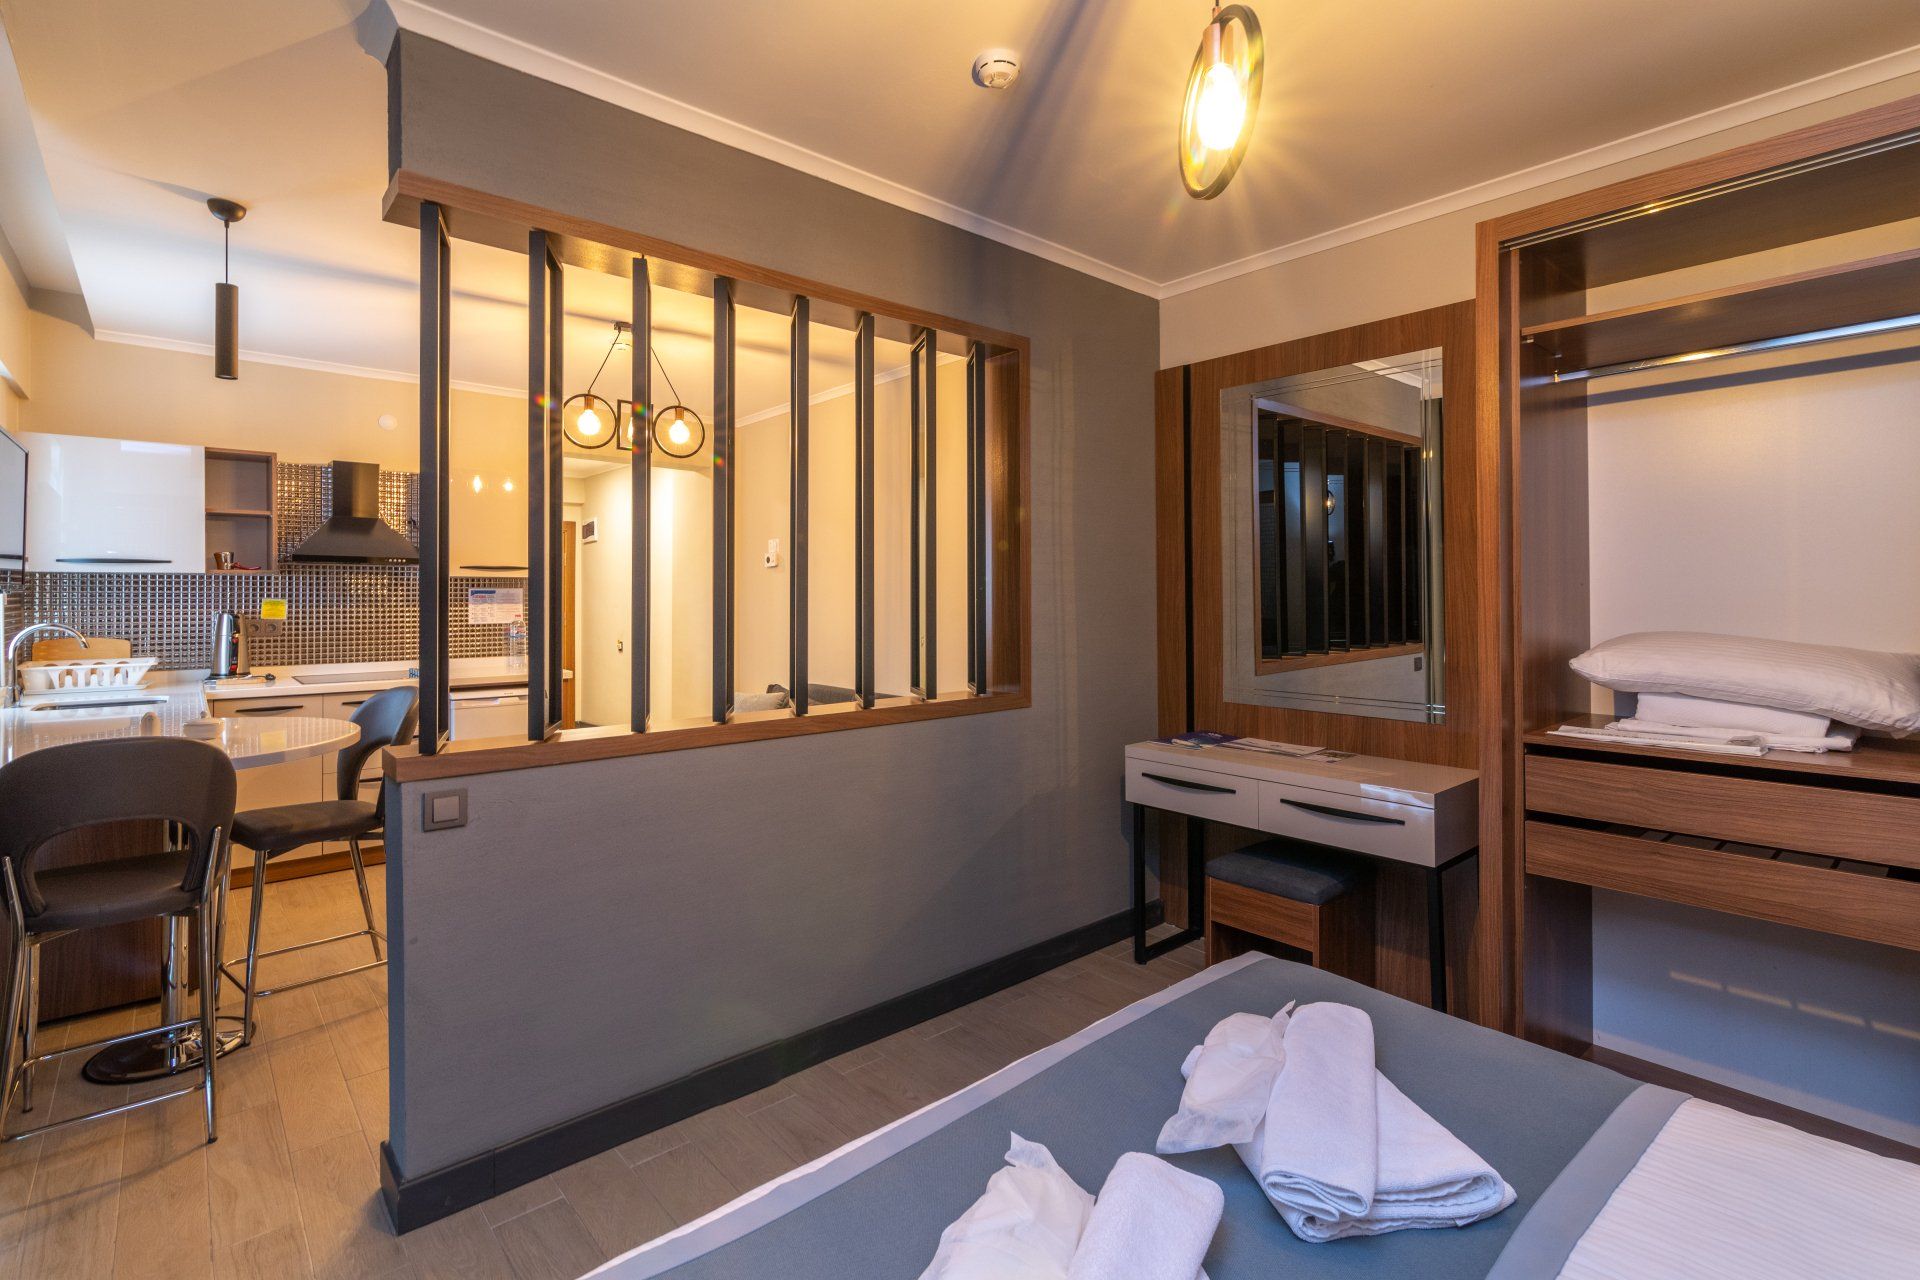 Afyon Aforia Thermal Residences, Beds